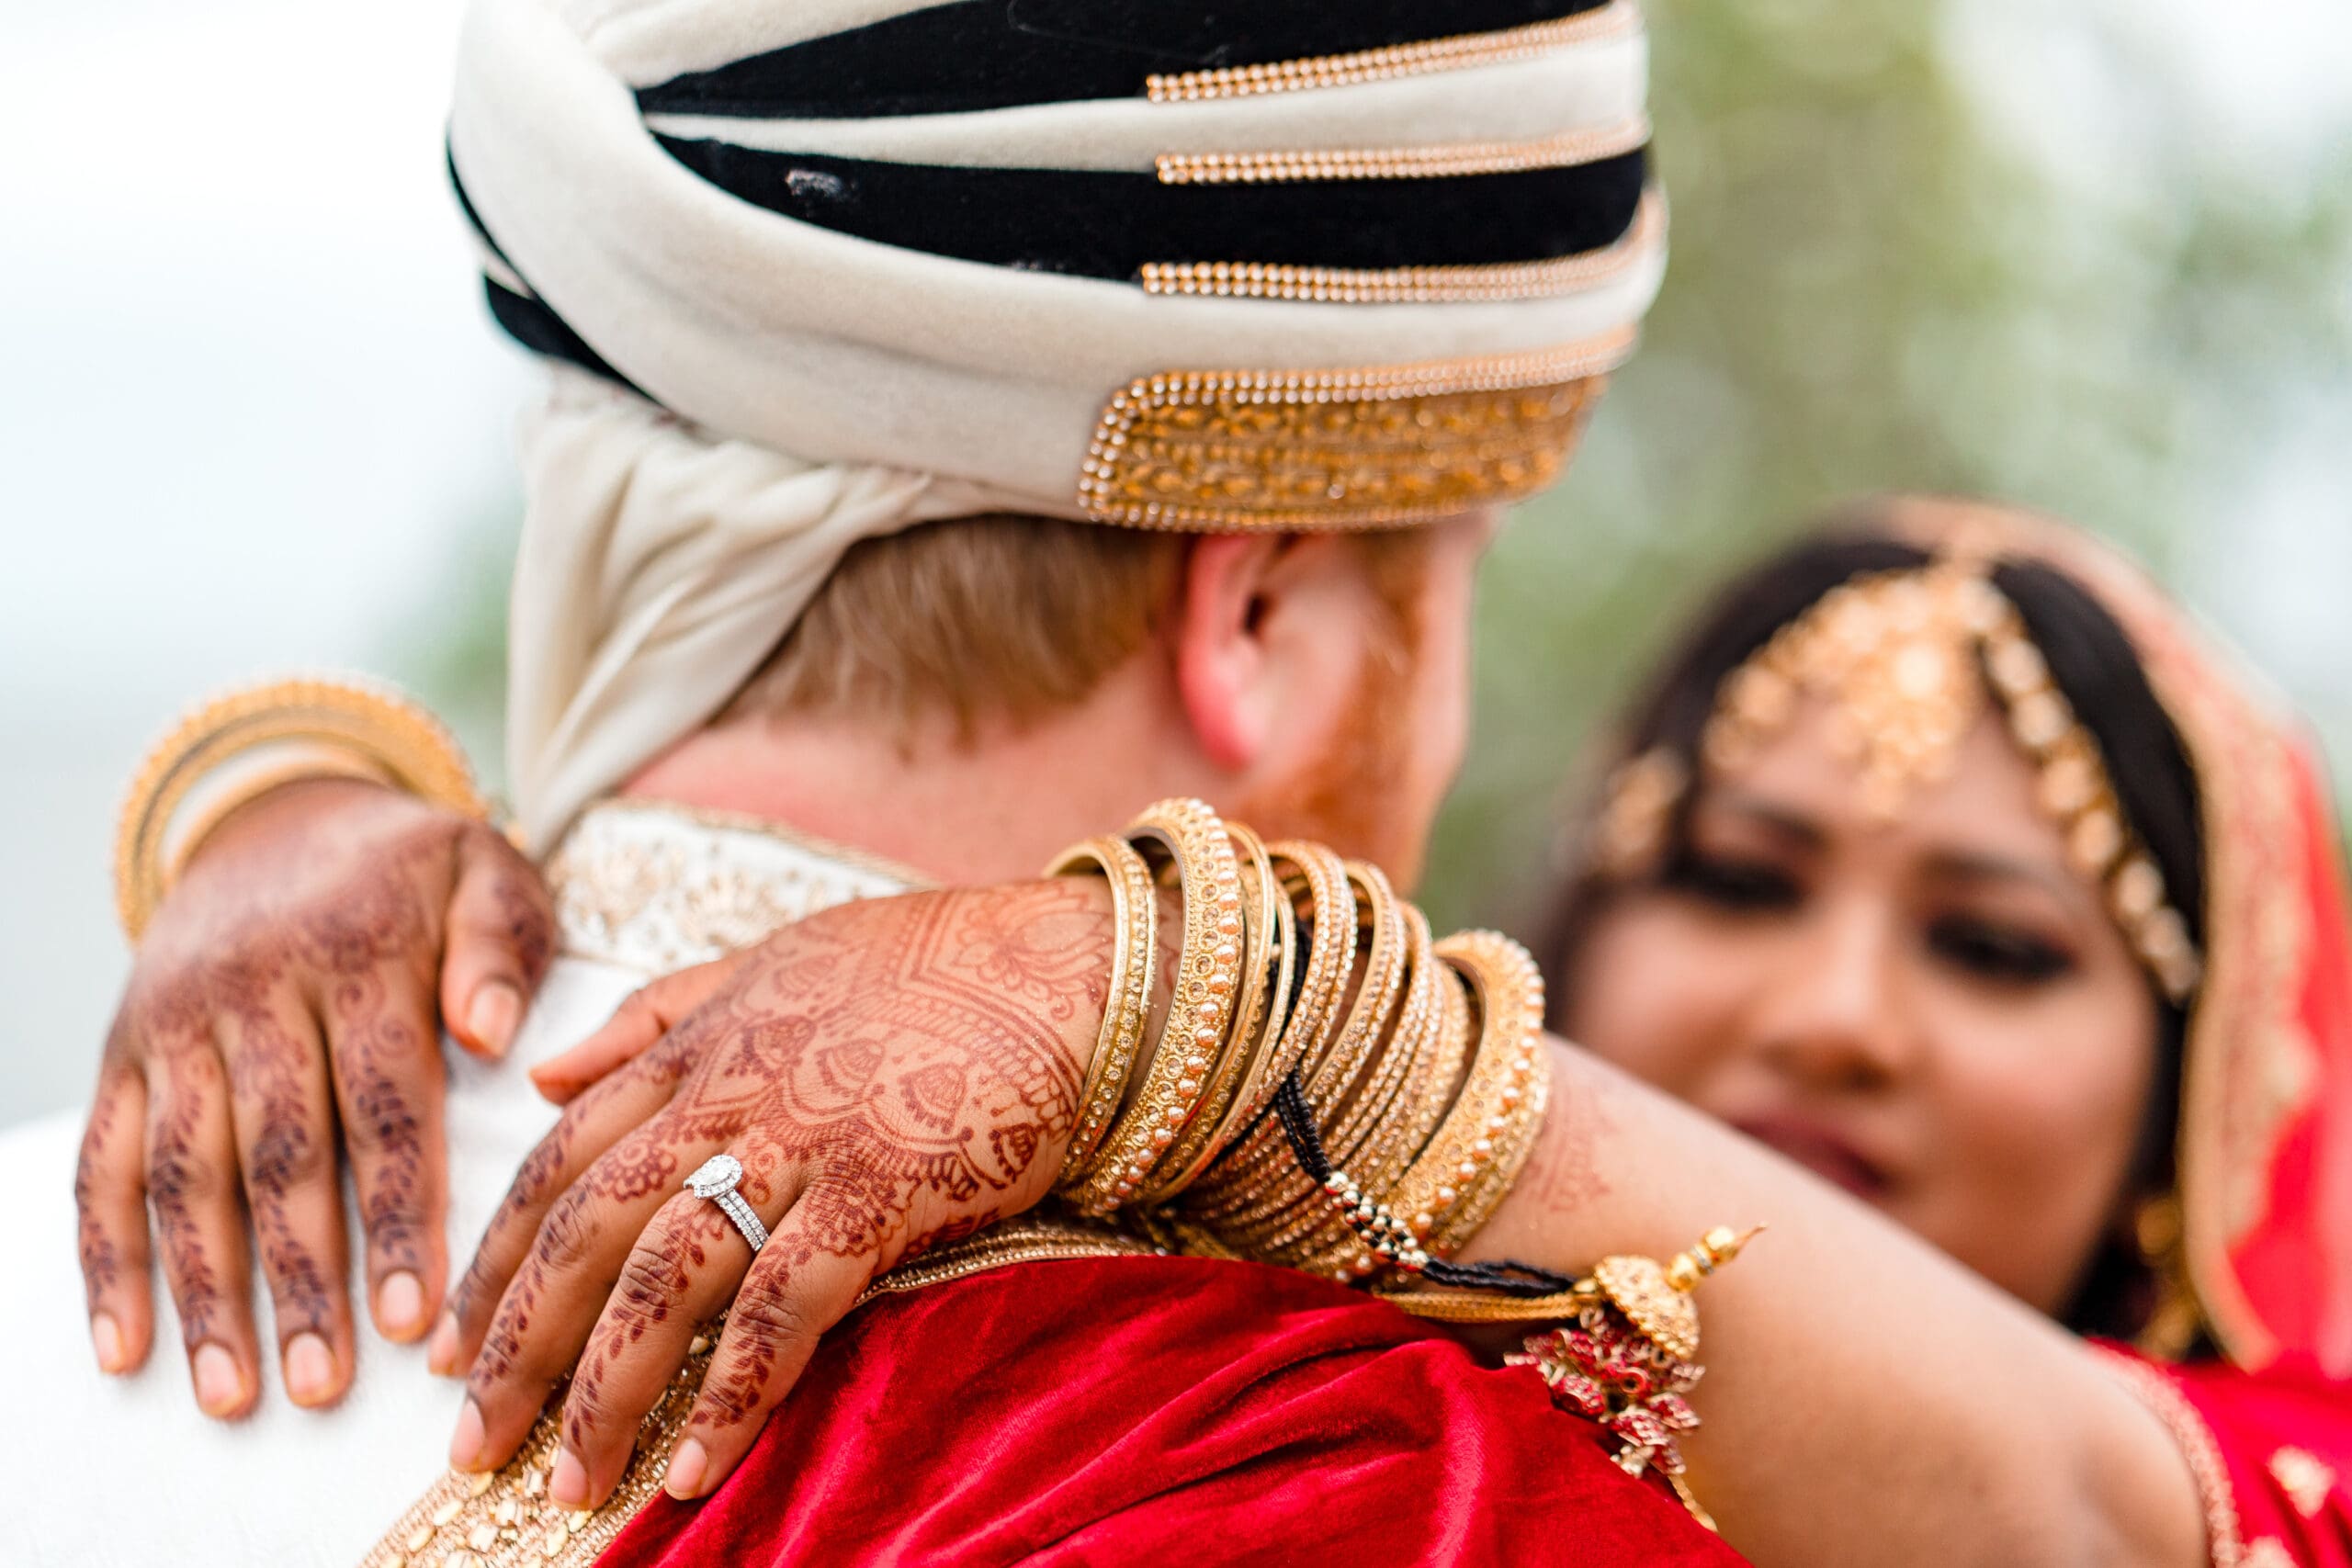 Close-up of newlyweds dancing in a cultural wedding ceremony, bride's hands adorned with henna tattoos and wedding ring.